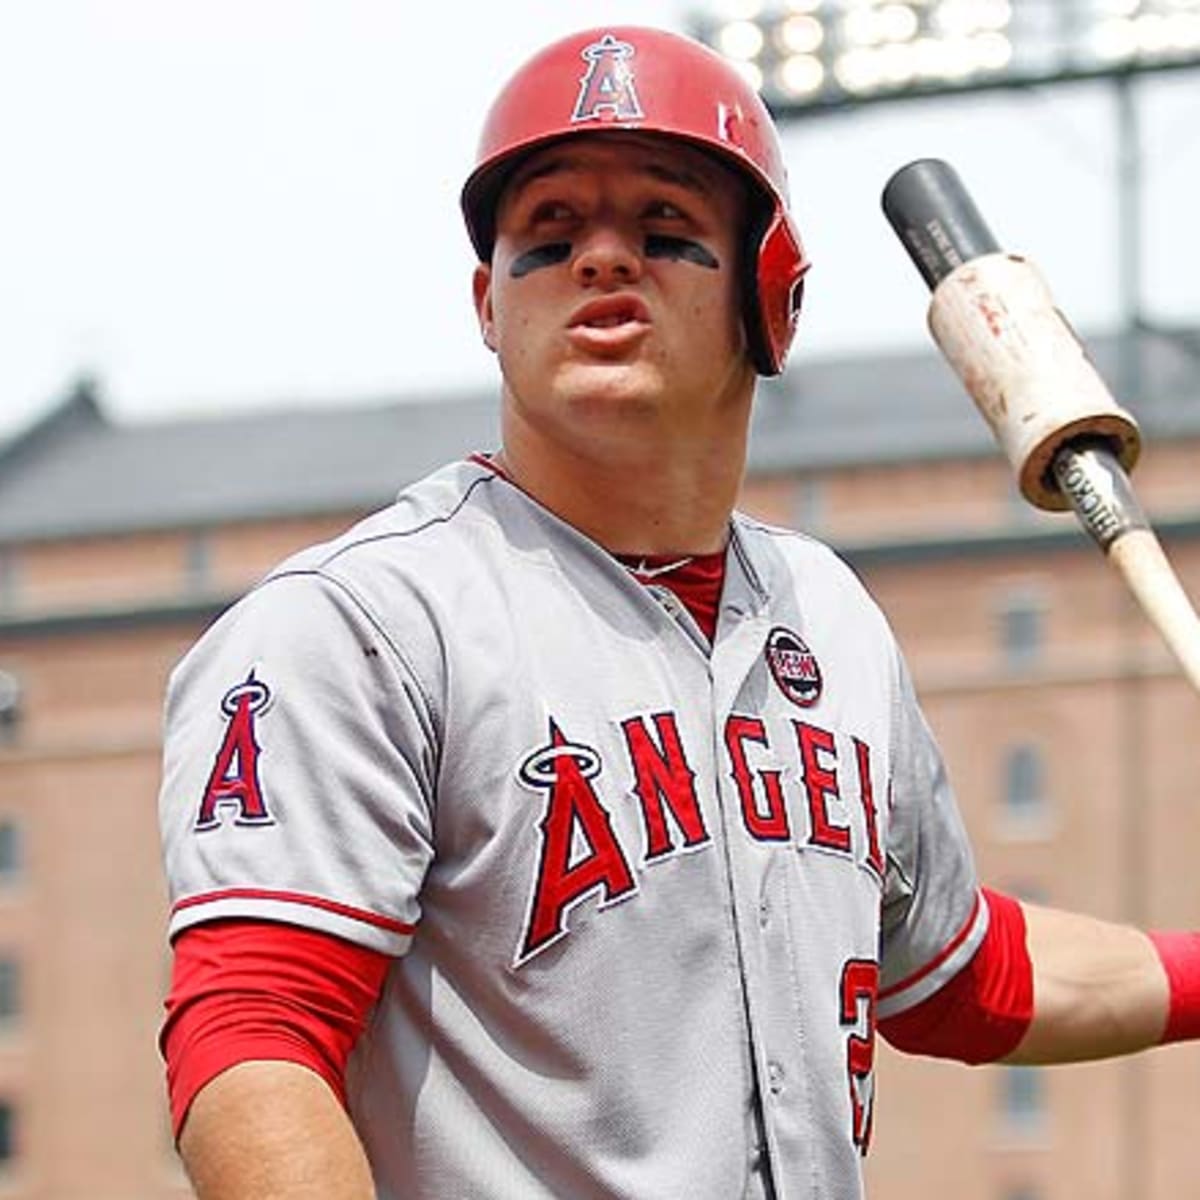 Trout vs. Harper: Which rookie has the higher ceiling?